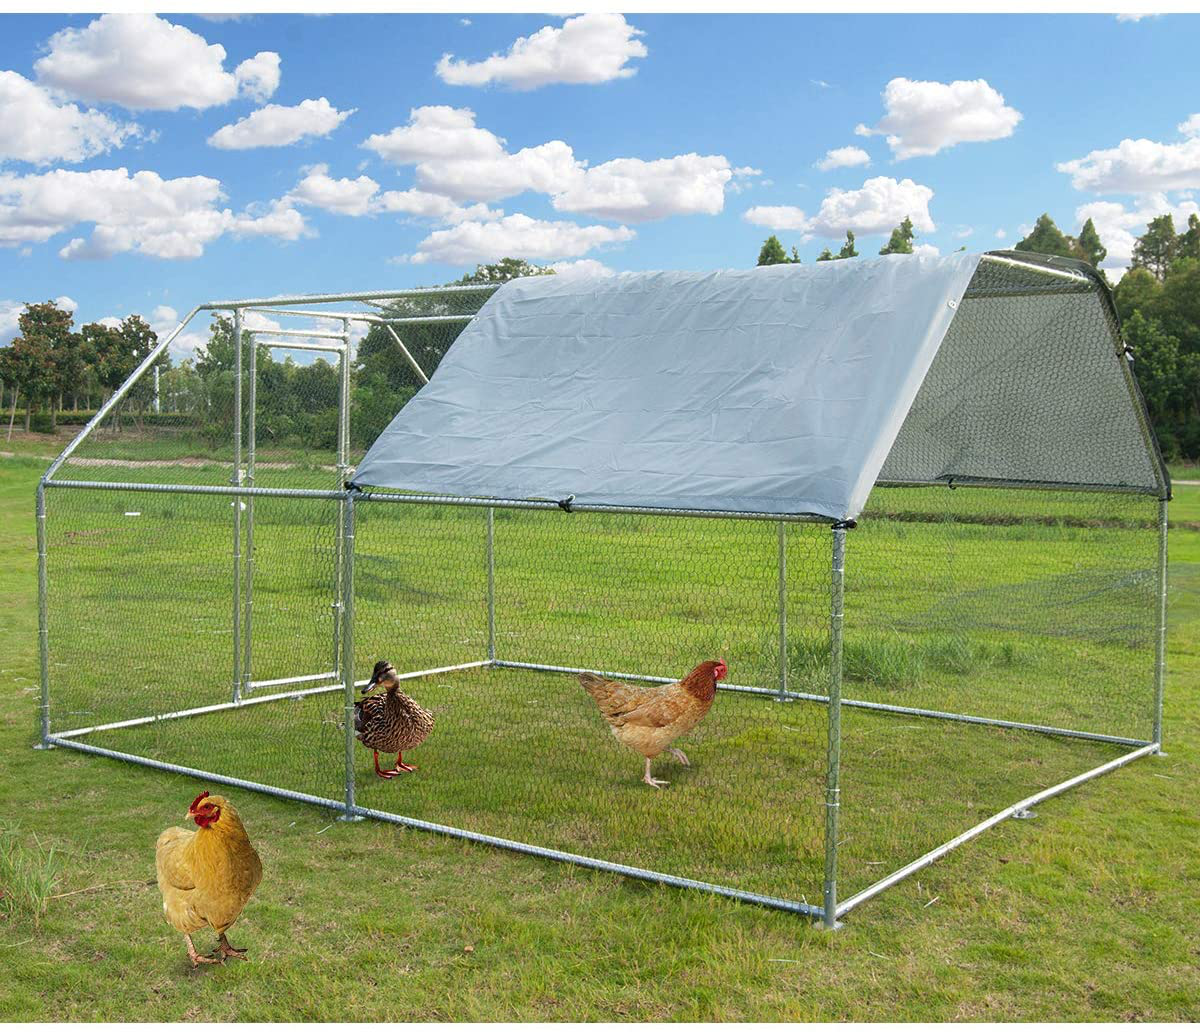 Large Metal Chicken Coop Walk-In Poultry Cage Hen Run House Rabbits Habitat Cage Flat Roofed Cage with Waterproof and Anti-Ultraviolet Cover for Outdoor Backyard Farm Use (9.2' L X 12.5' W X 6.4' H)